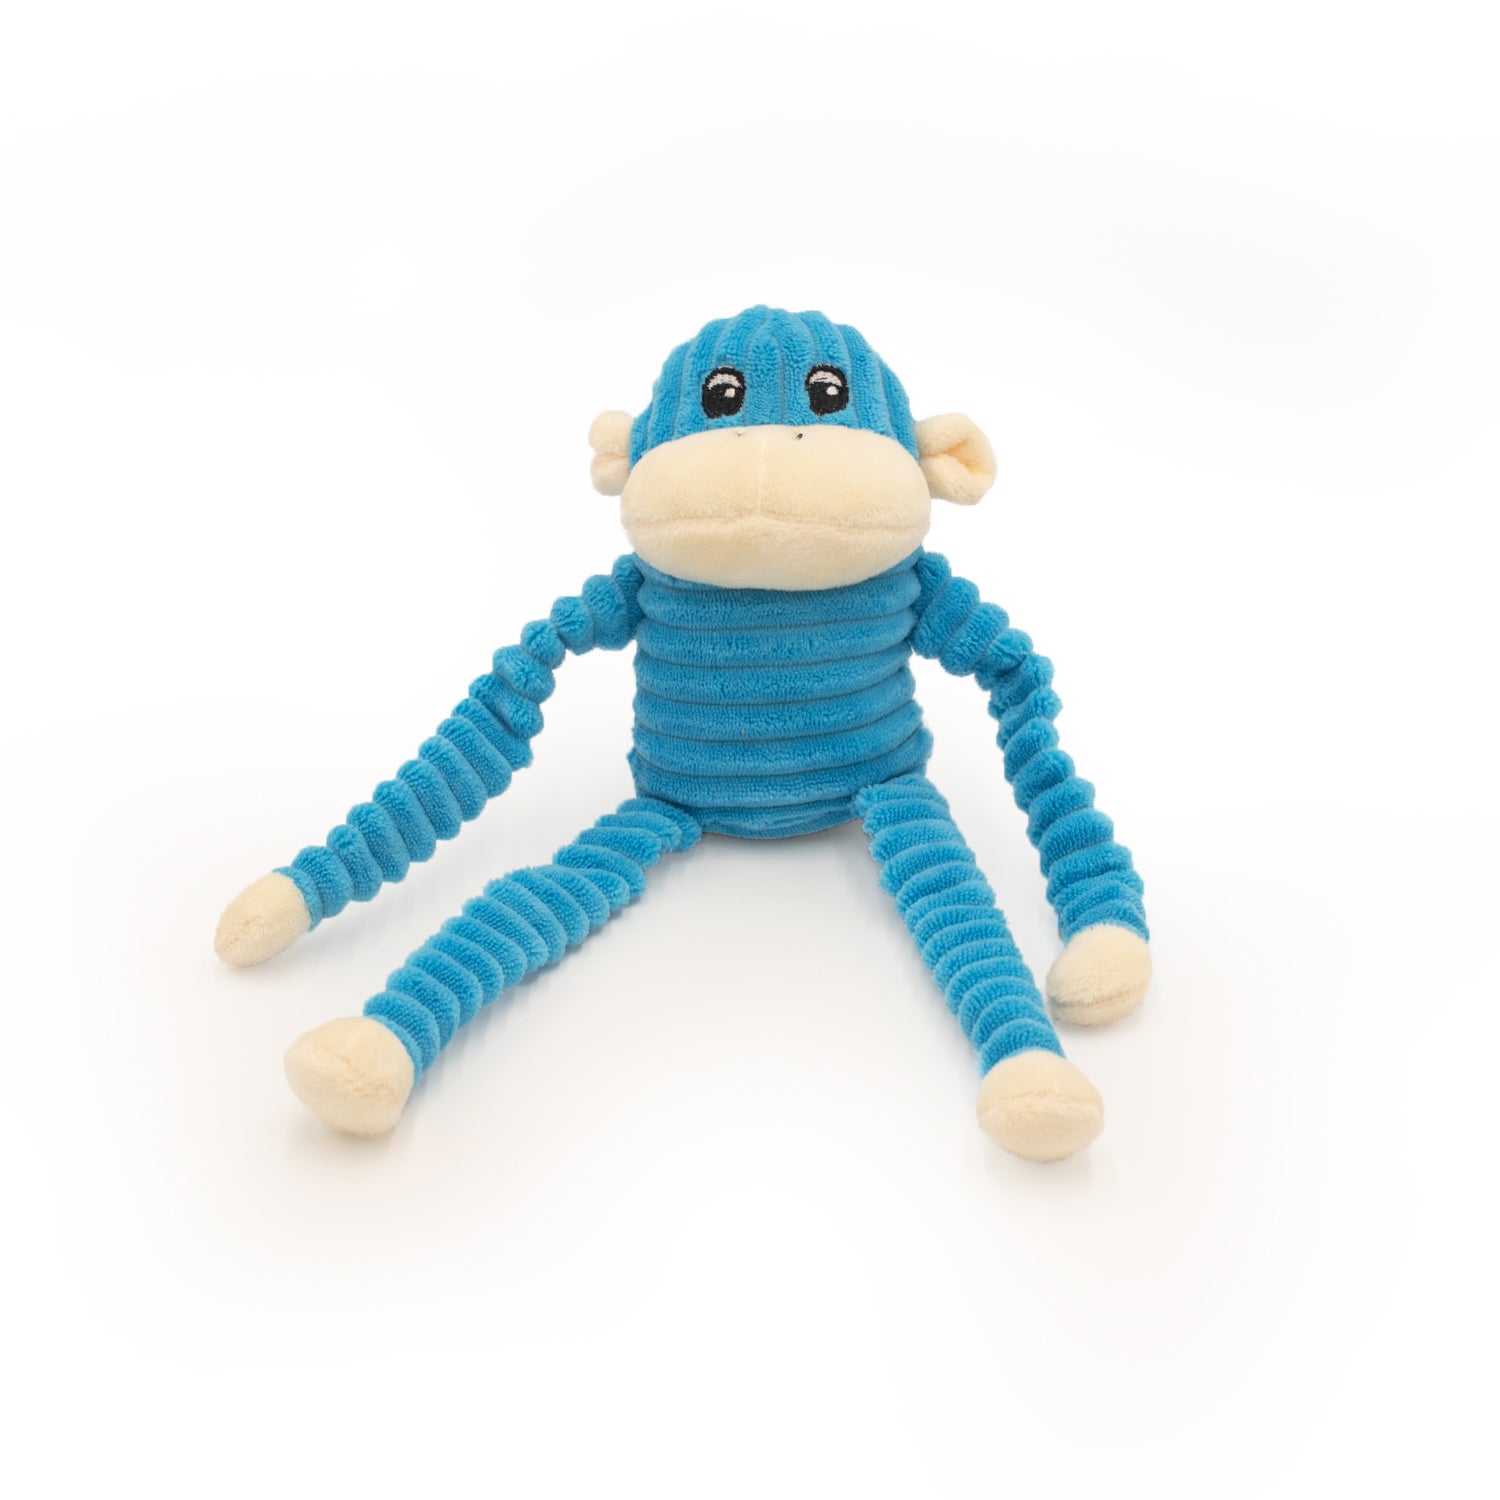 Spencer the Crinkle Monkey 2-Pack Small Rainbow and Blue 24/cs